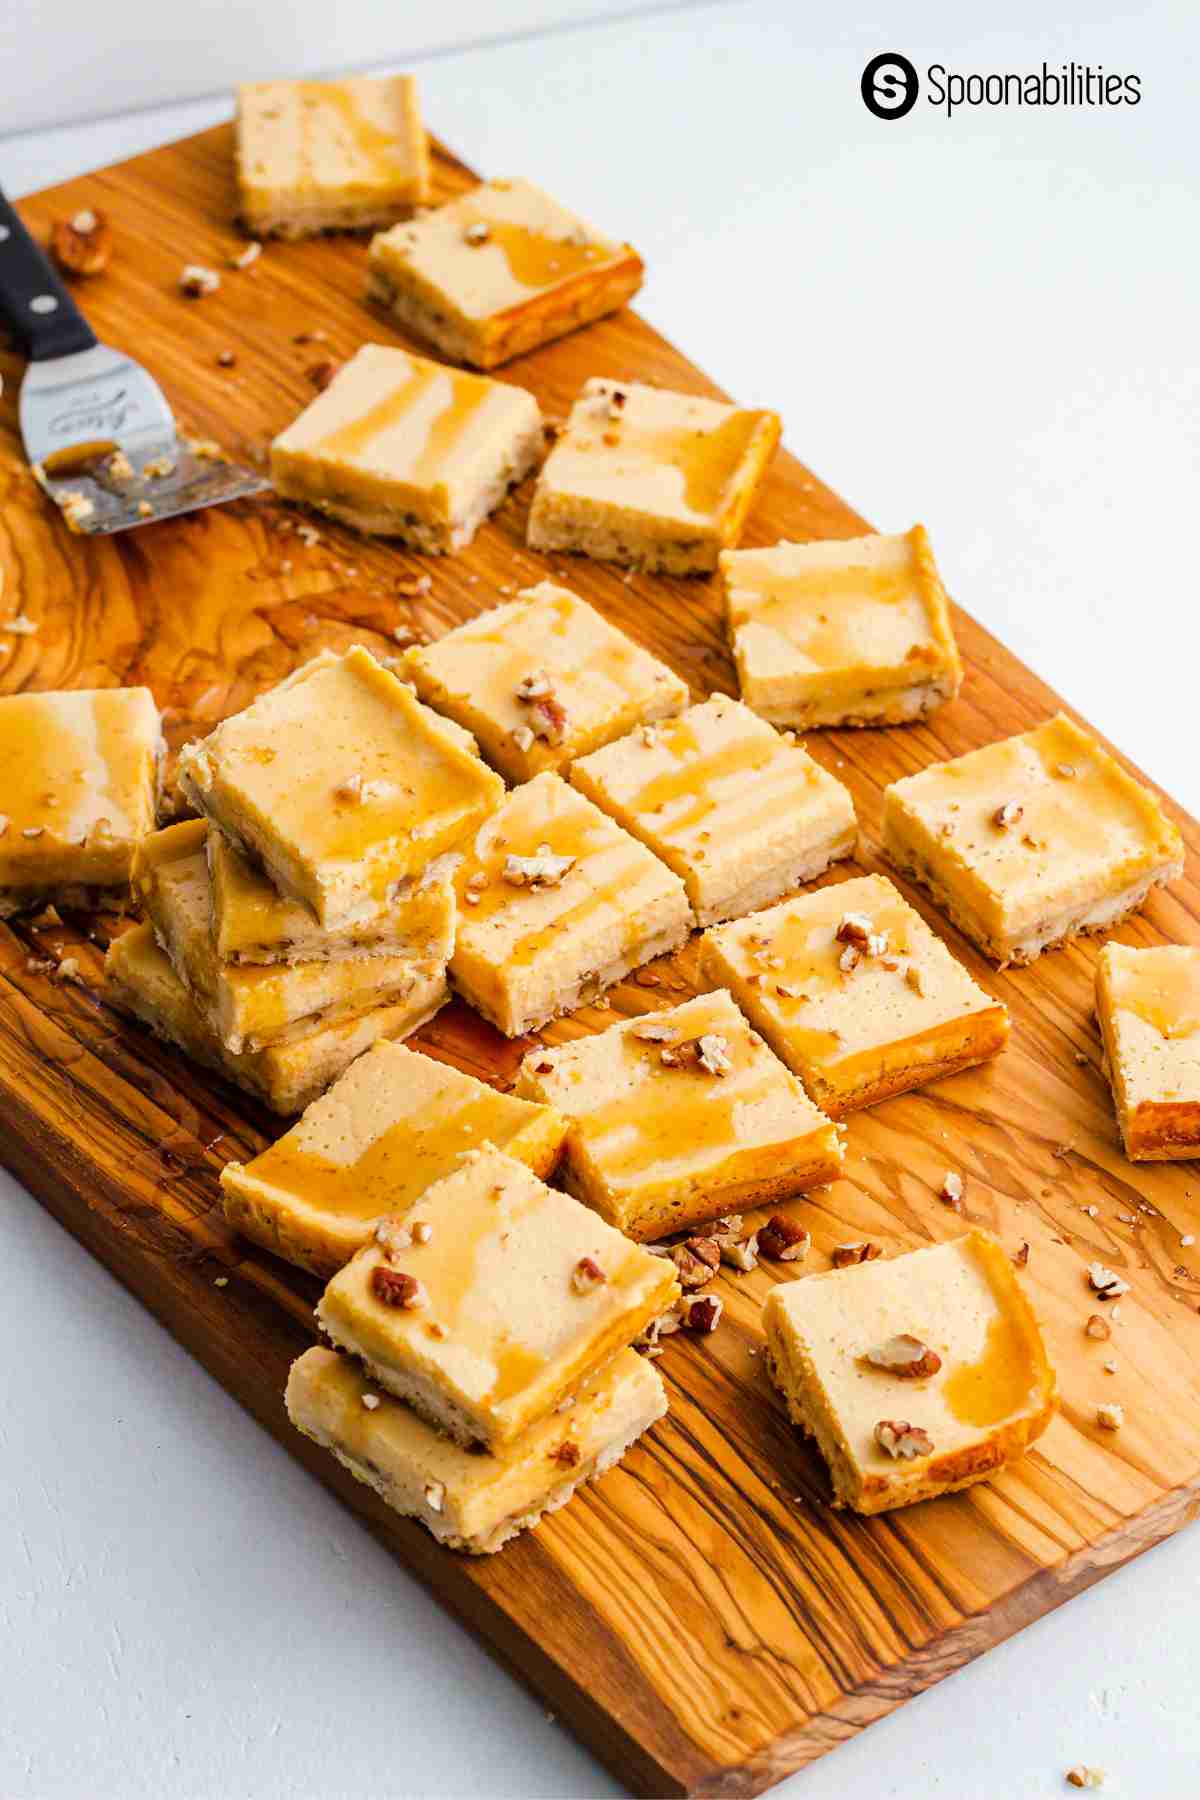 Cheesecake bars with drizzle on a wooden board